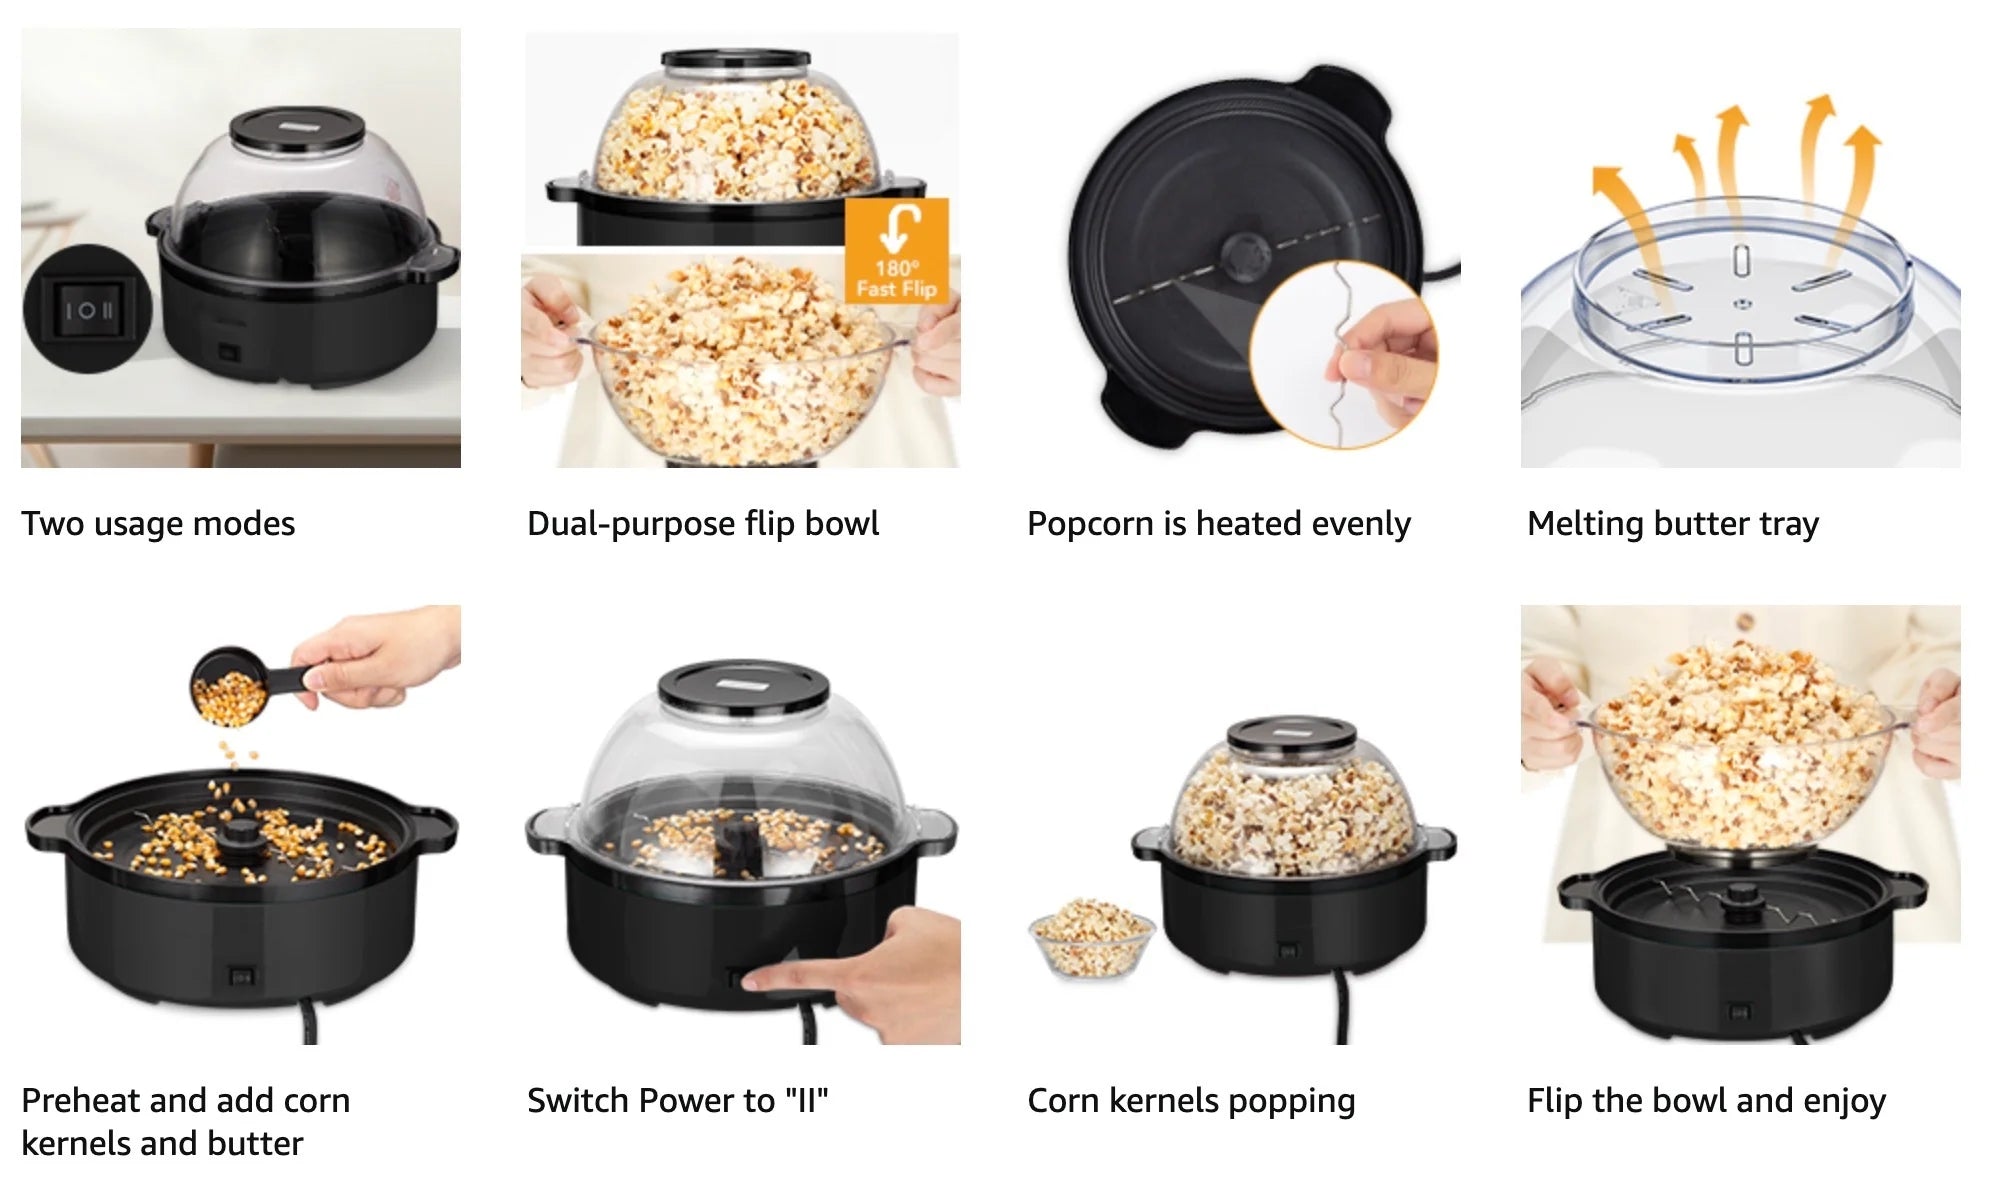 GARVEE Electric Hot-oil Popcorn Popper Maker Multifunctional Machine 16-Cup for Home Party